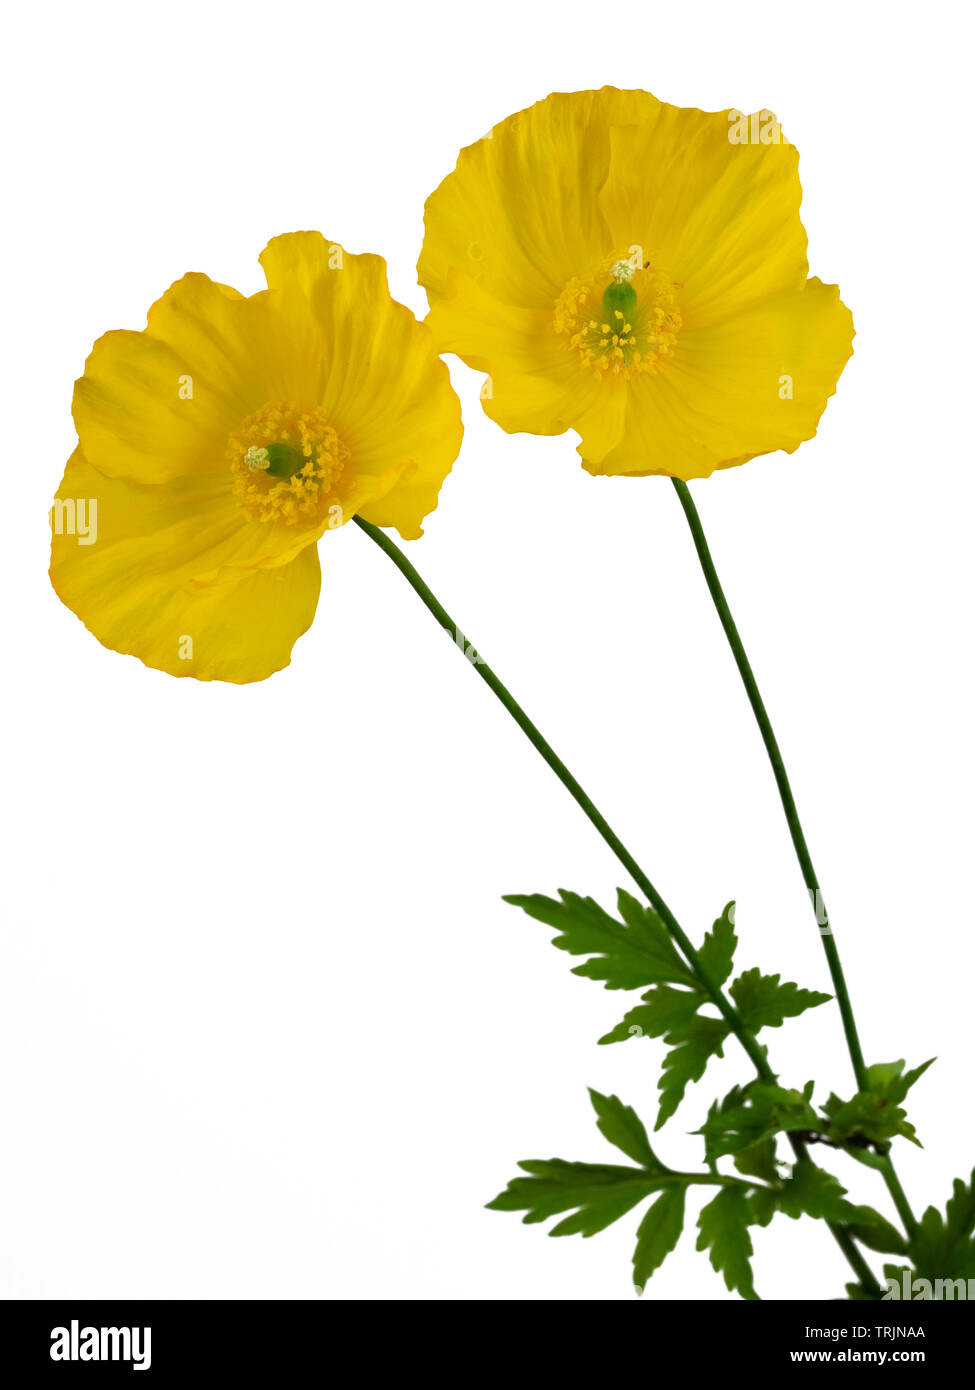 Two flowers of the cottage garden welsh poppy, Papaver cambricum, on a white background Stock Photo